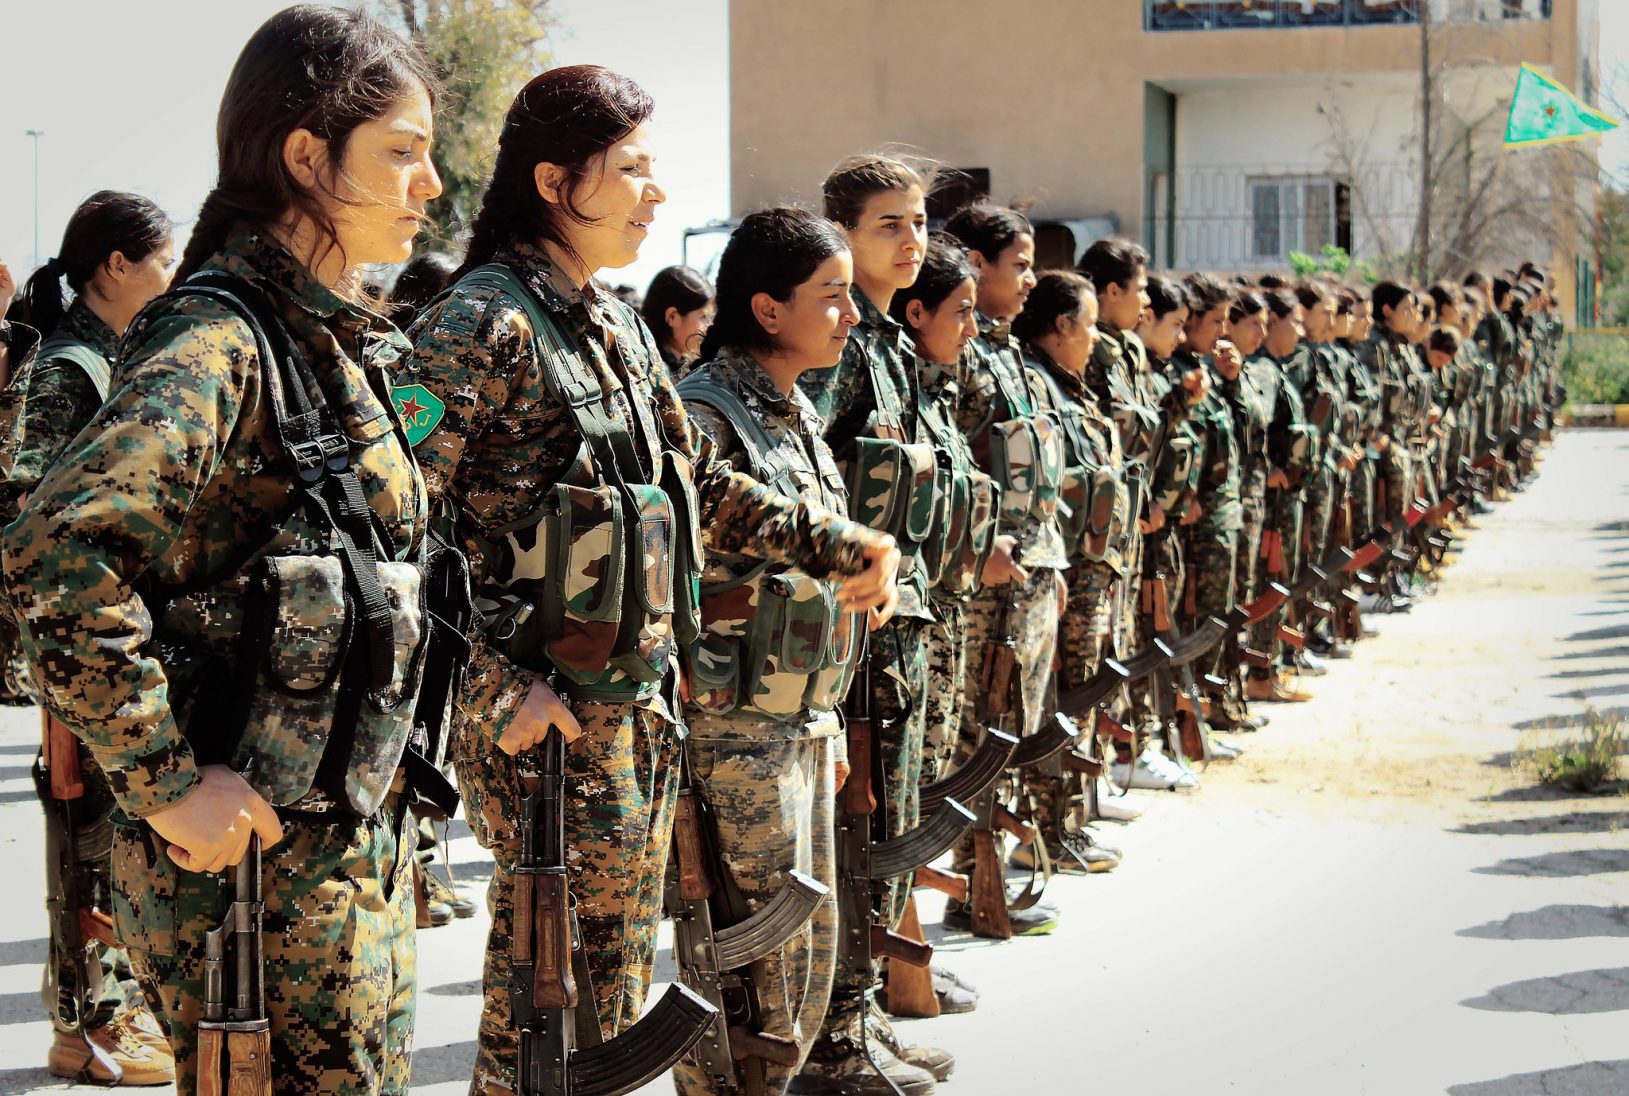 Kurdish YPG Fighters Stand in Line. Photo by Uzi Doeslt, Flickr.